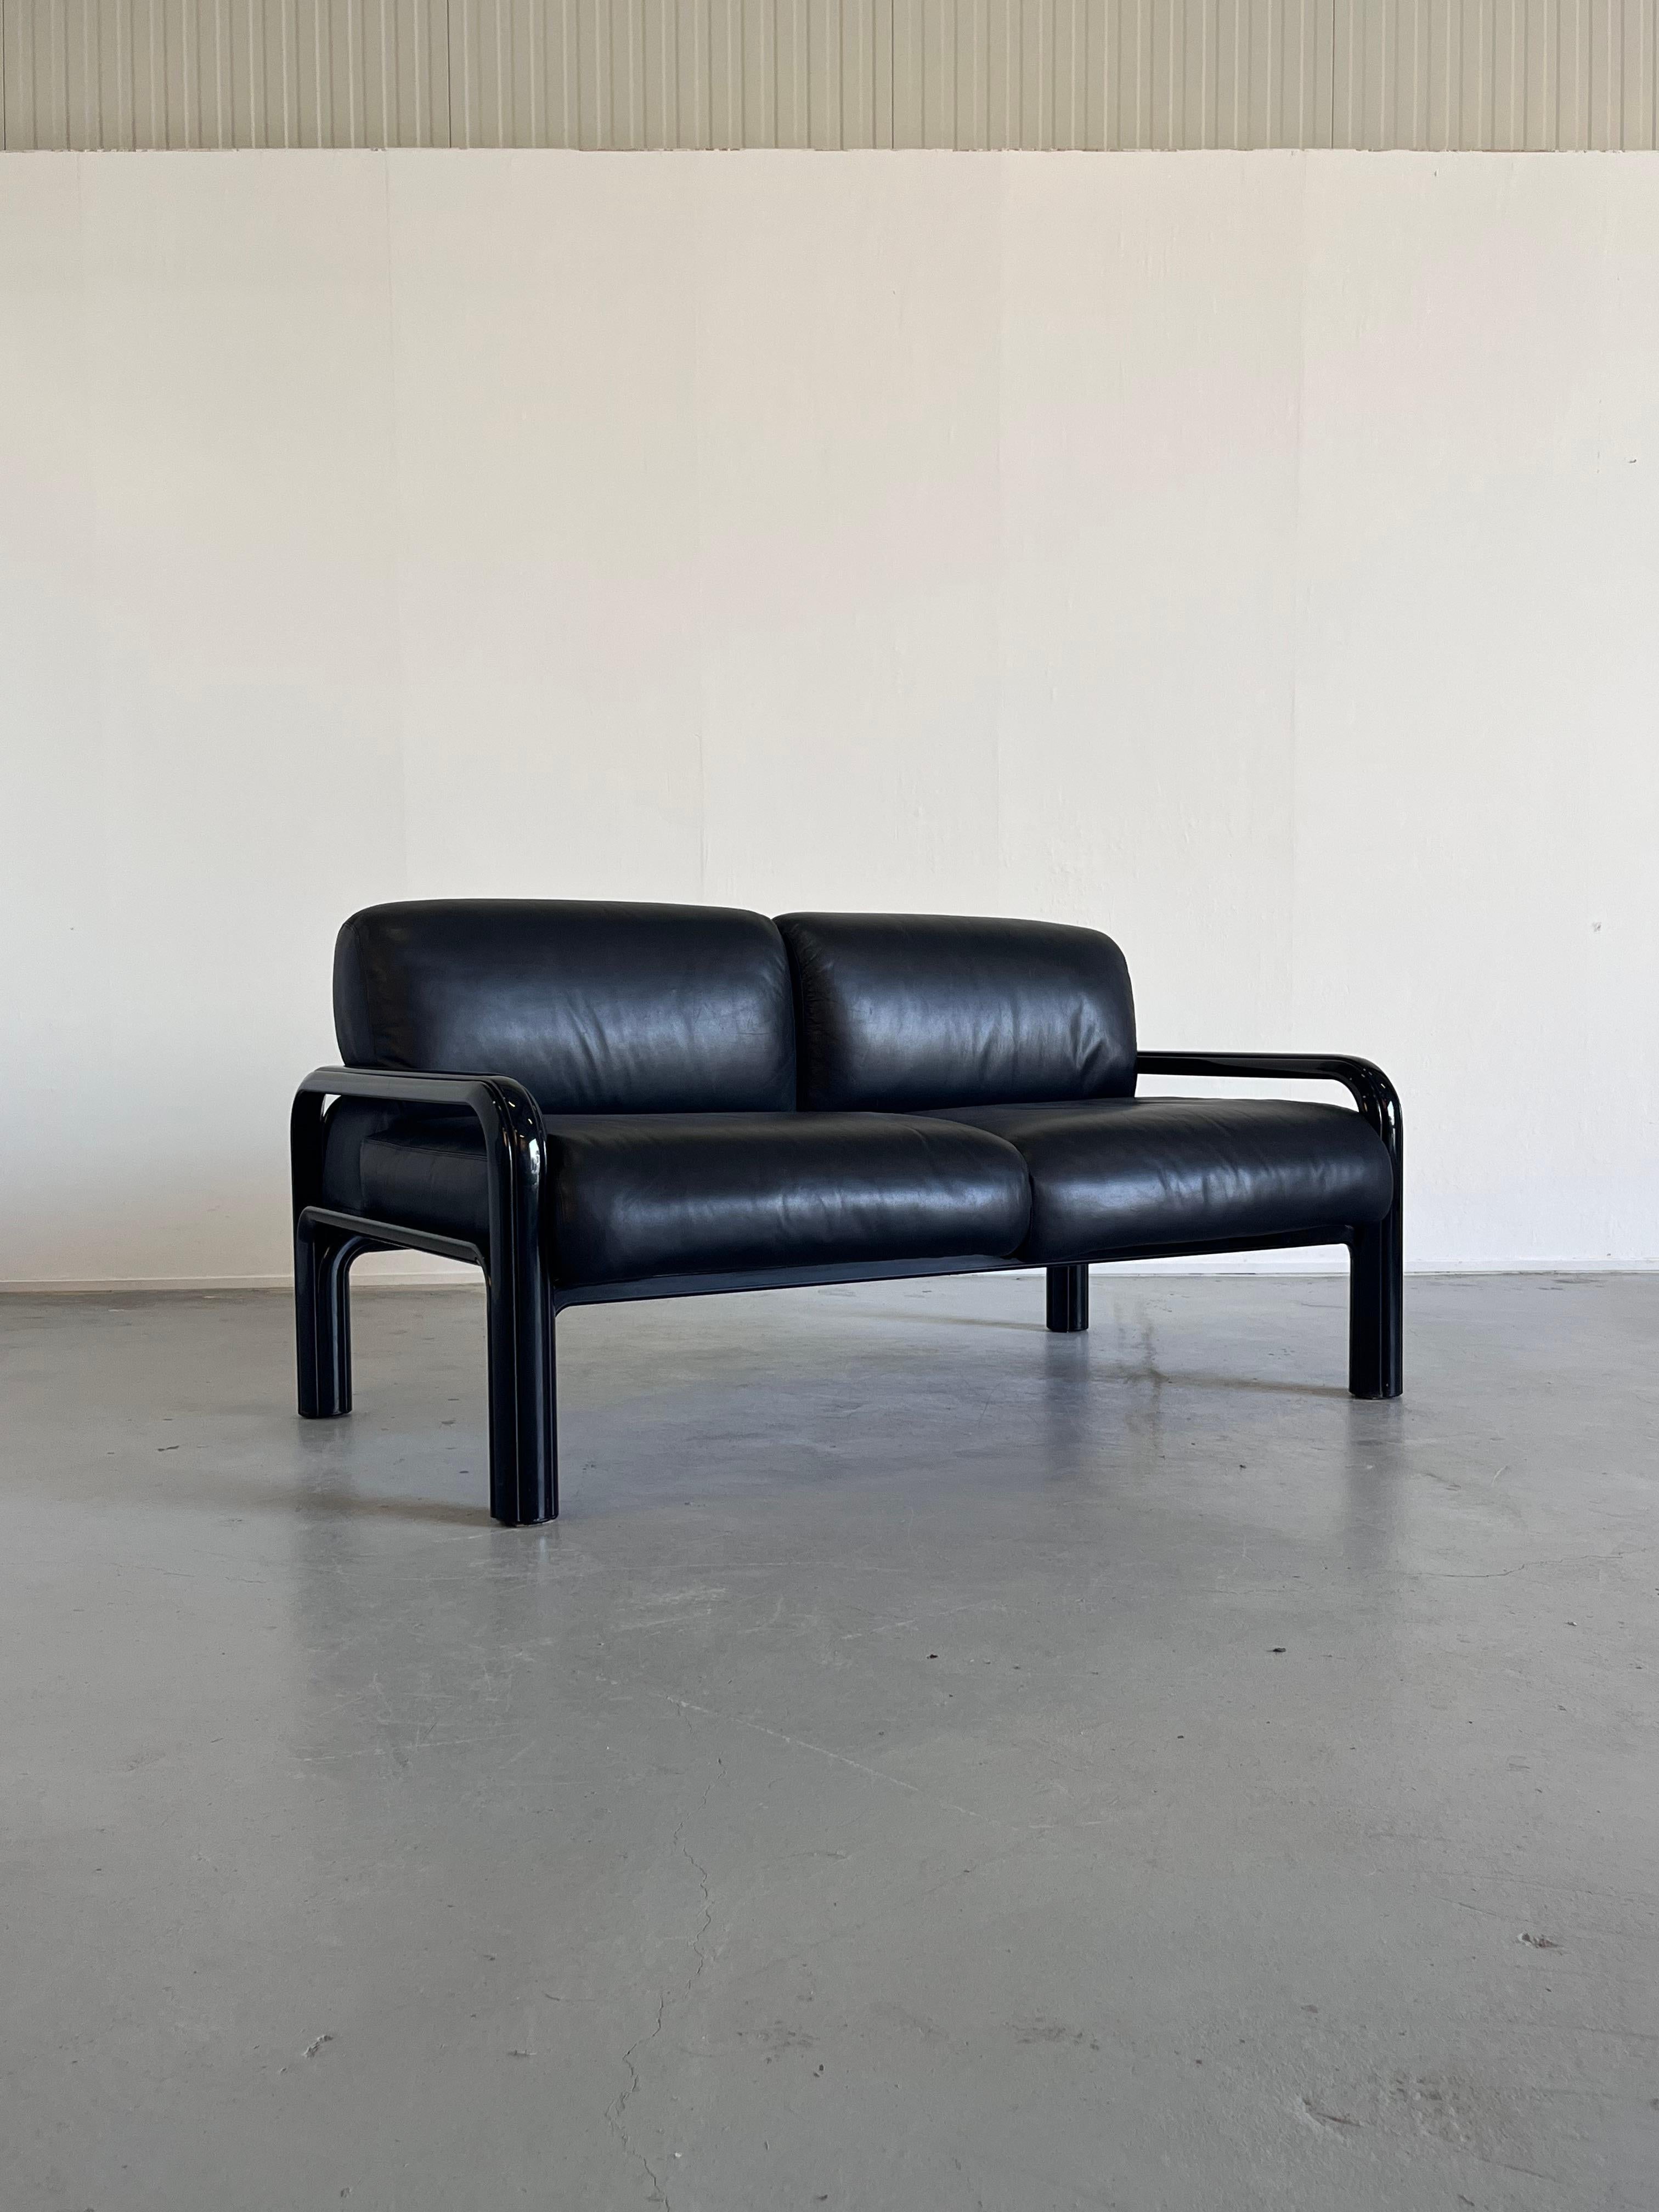 A vintage original loveseat club sofa designed by the Italian designer Gae Aulenti in 1976 as part of the lounge seating line for the Aulenti Collection of Knoll International. The lacquered frames are made from extruded steel and the loose cushions